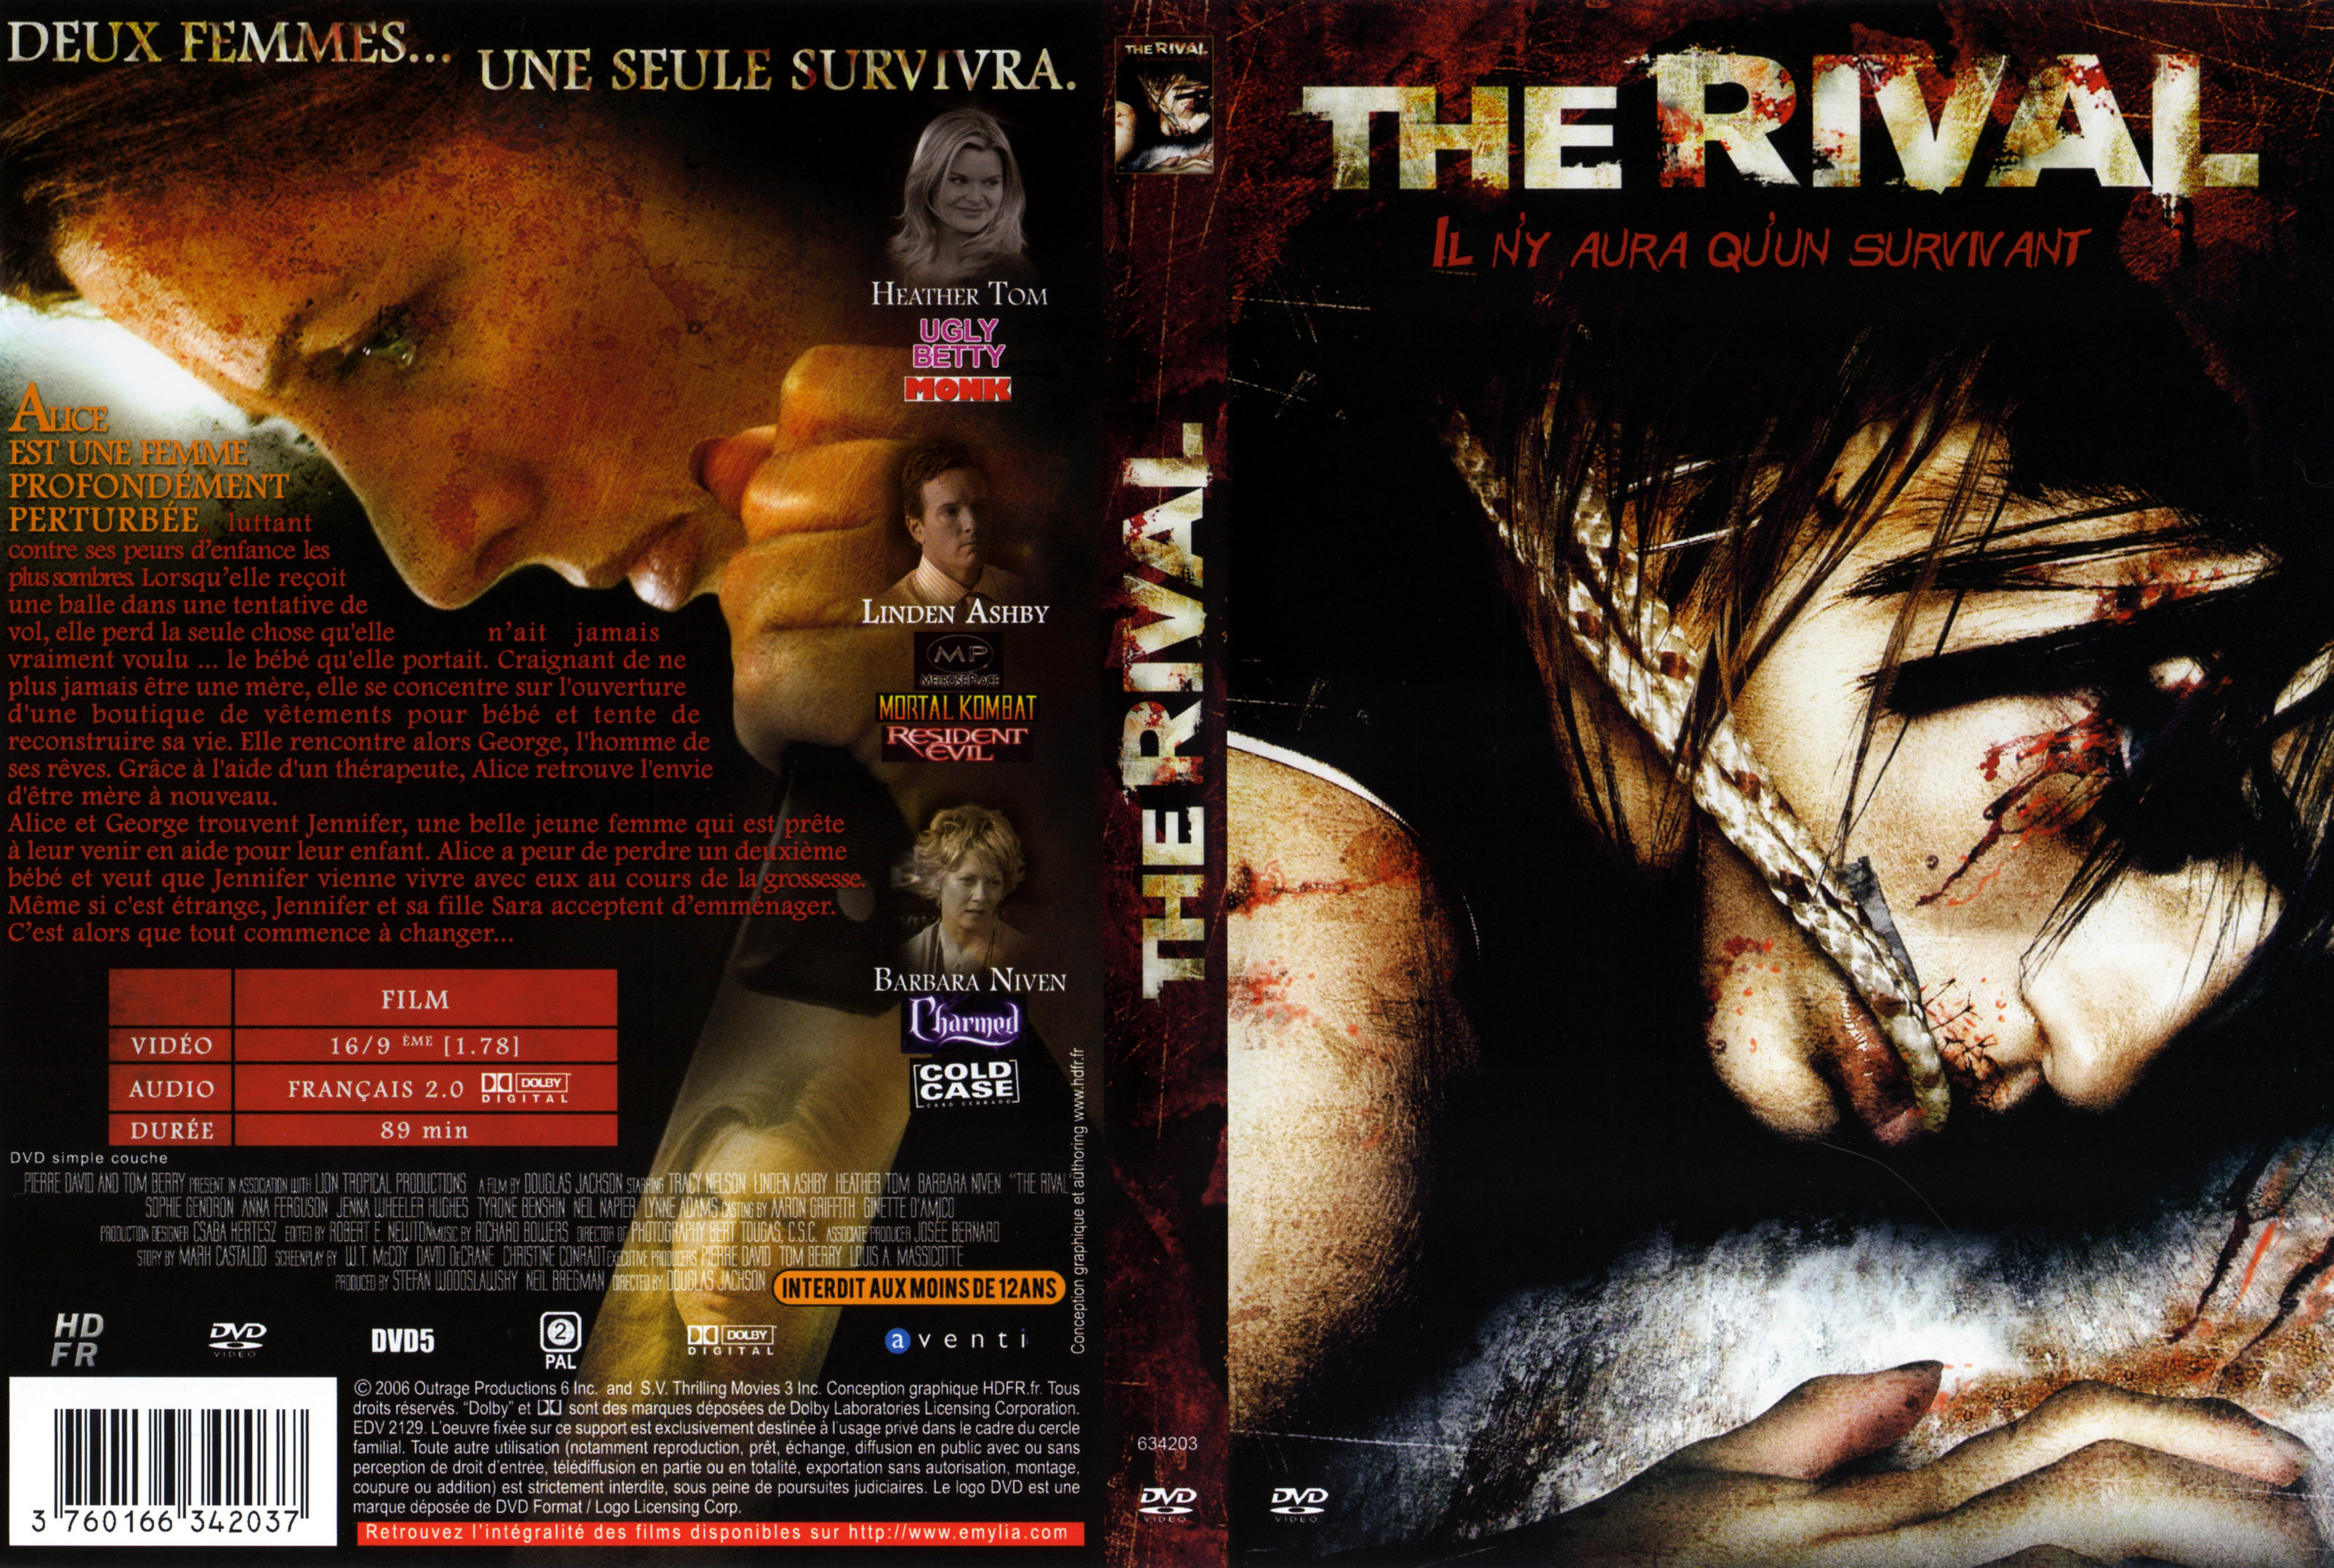 Jaquette DVD The rival